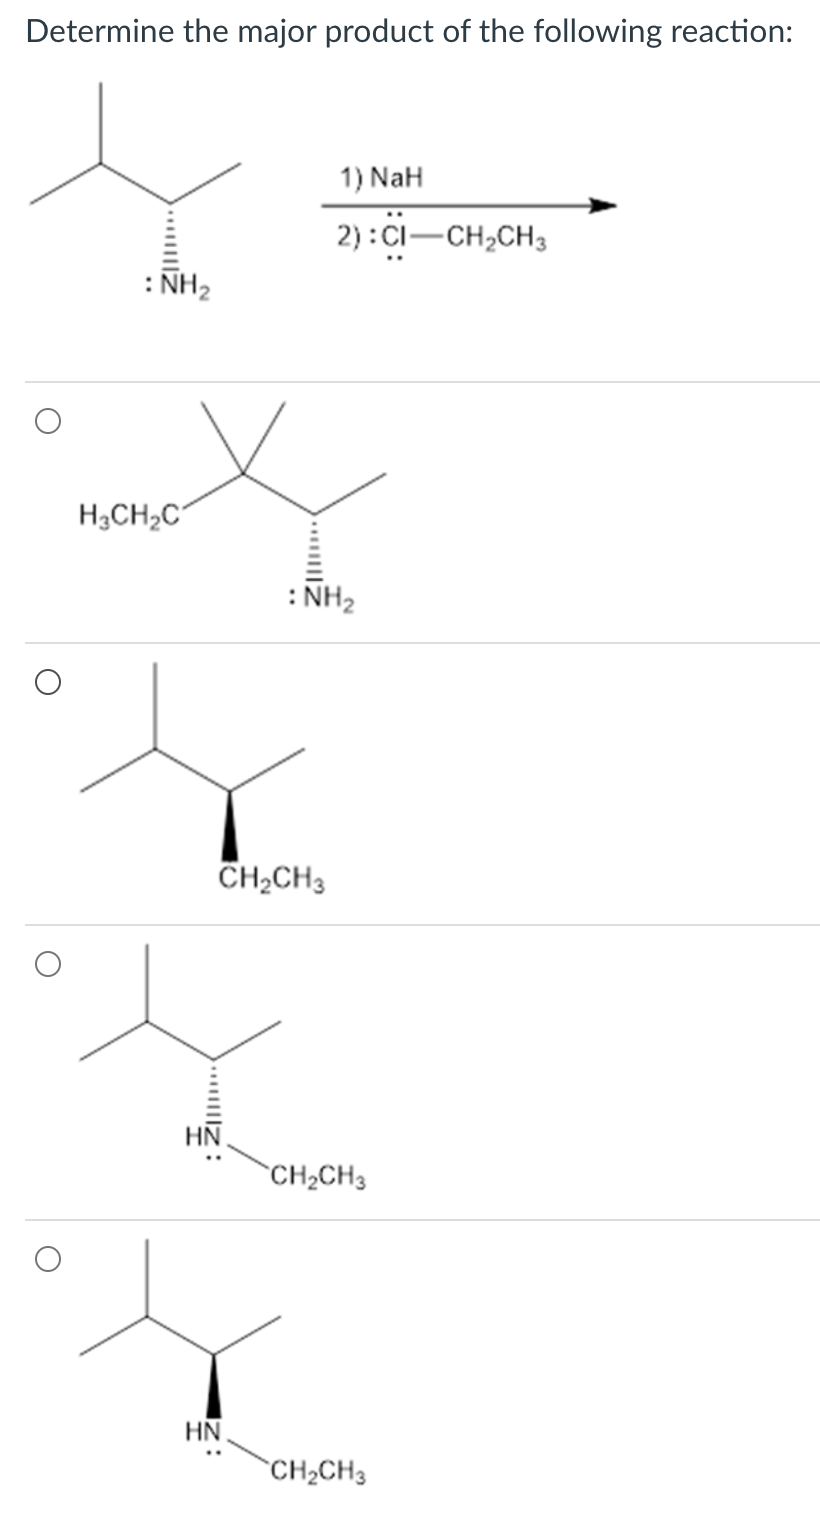 Determine the major product of the following reaction:
: NH₂
H3CH₂C
CH₂CH3
HN
HN
1) NaH
2):CI-CH₂CH3
: NH₂
CH₂CH3
CH₂CH3